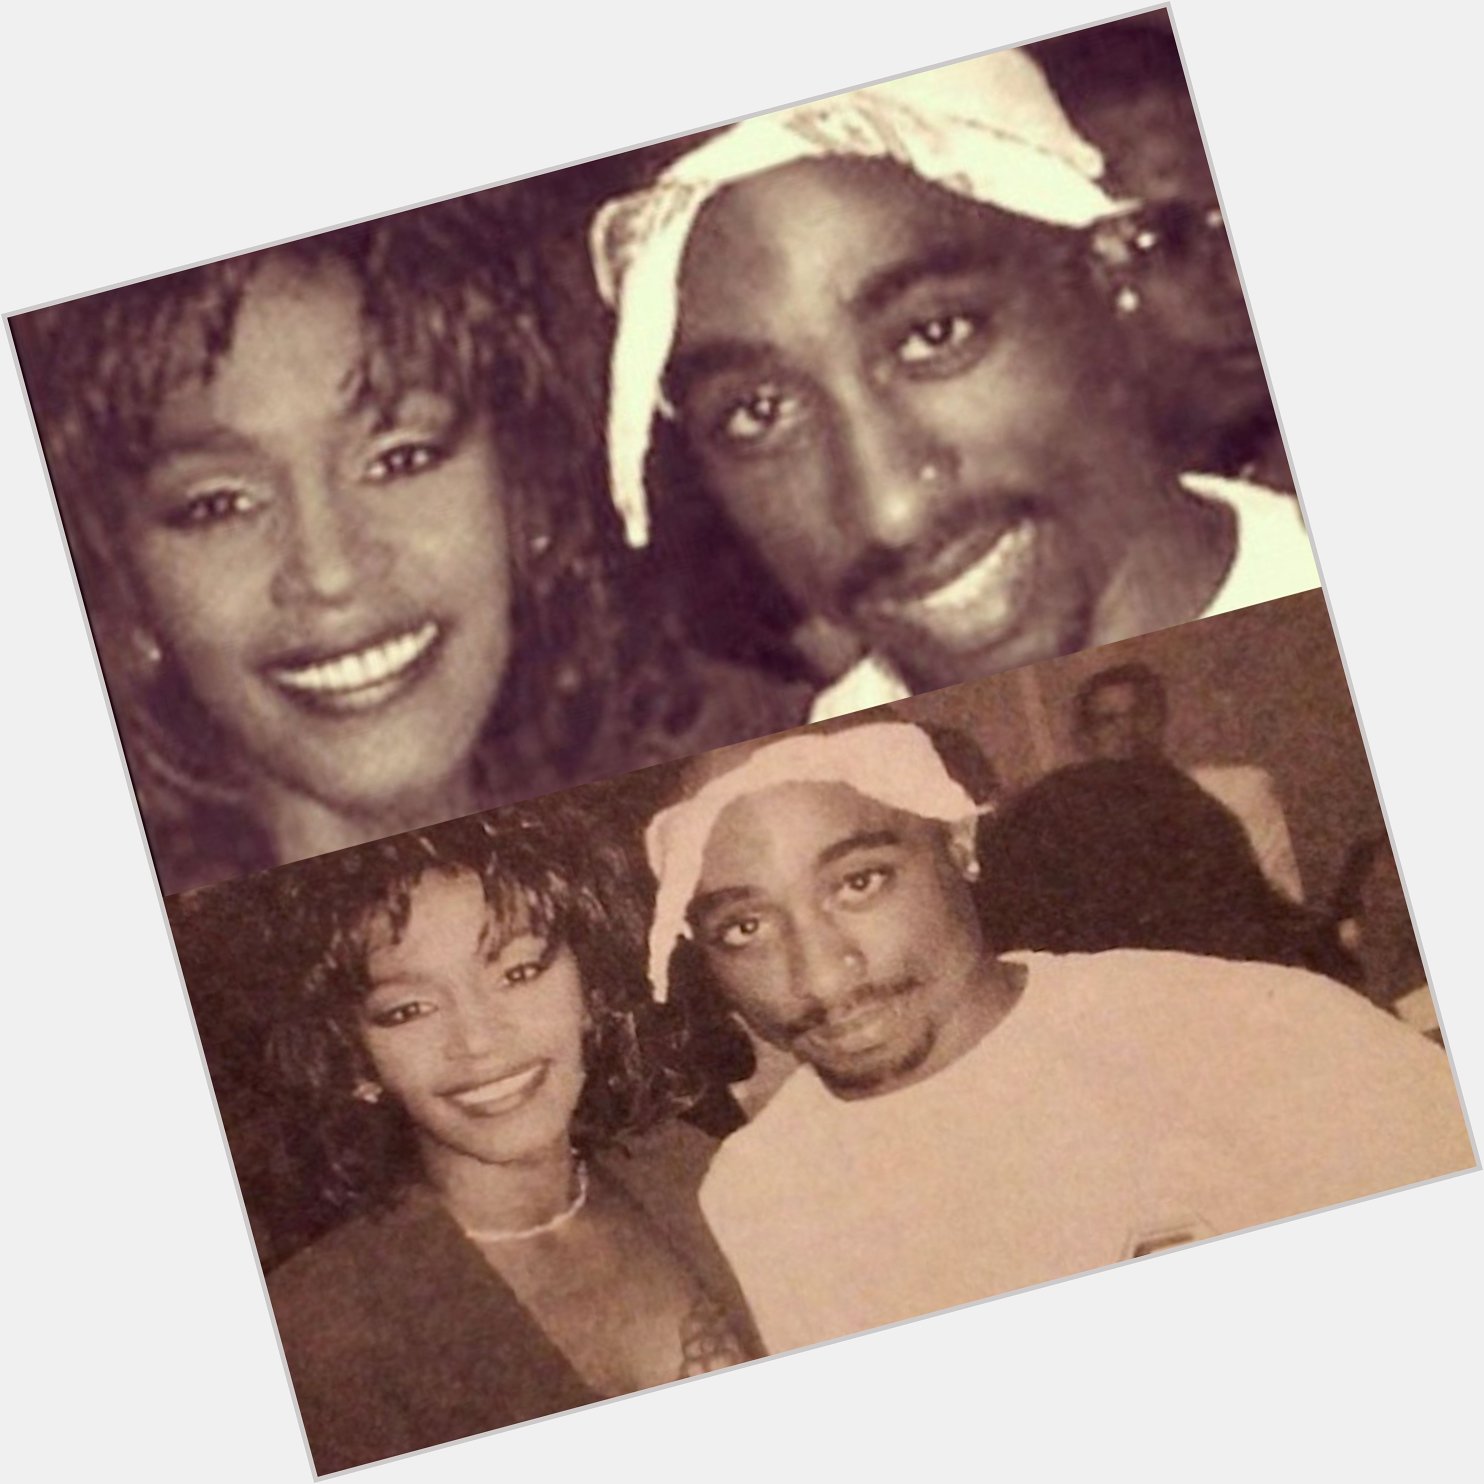 Happy 58th Birthday Whitney Houston Rest In Heaven To Her & 2pac. 